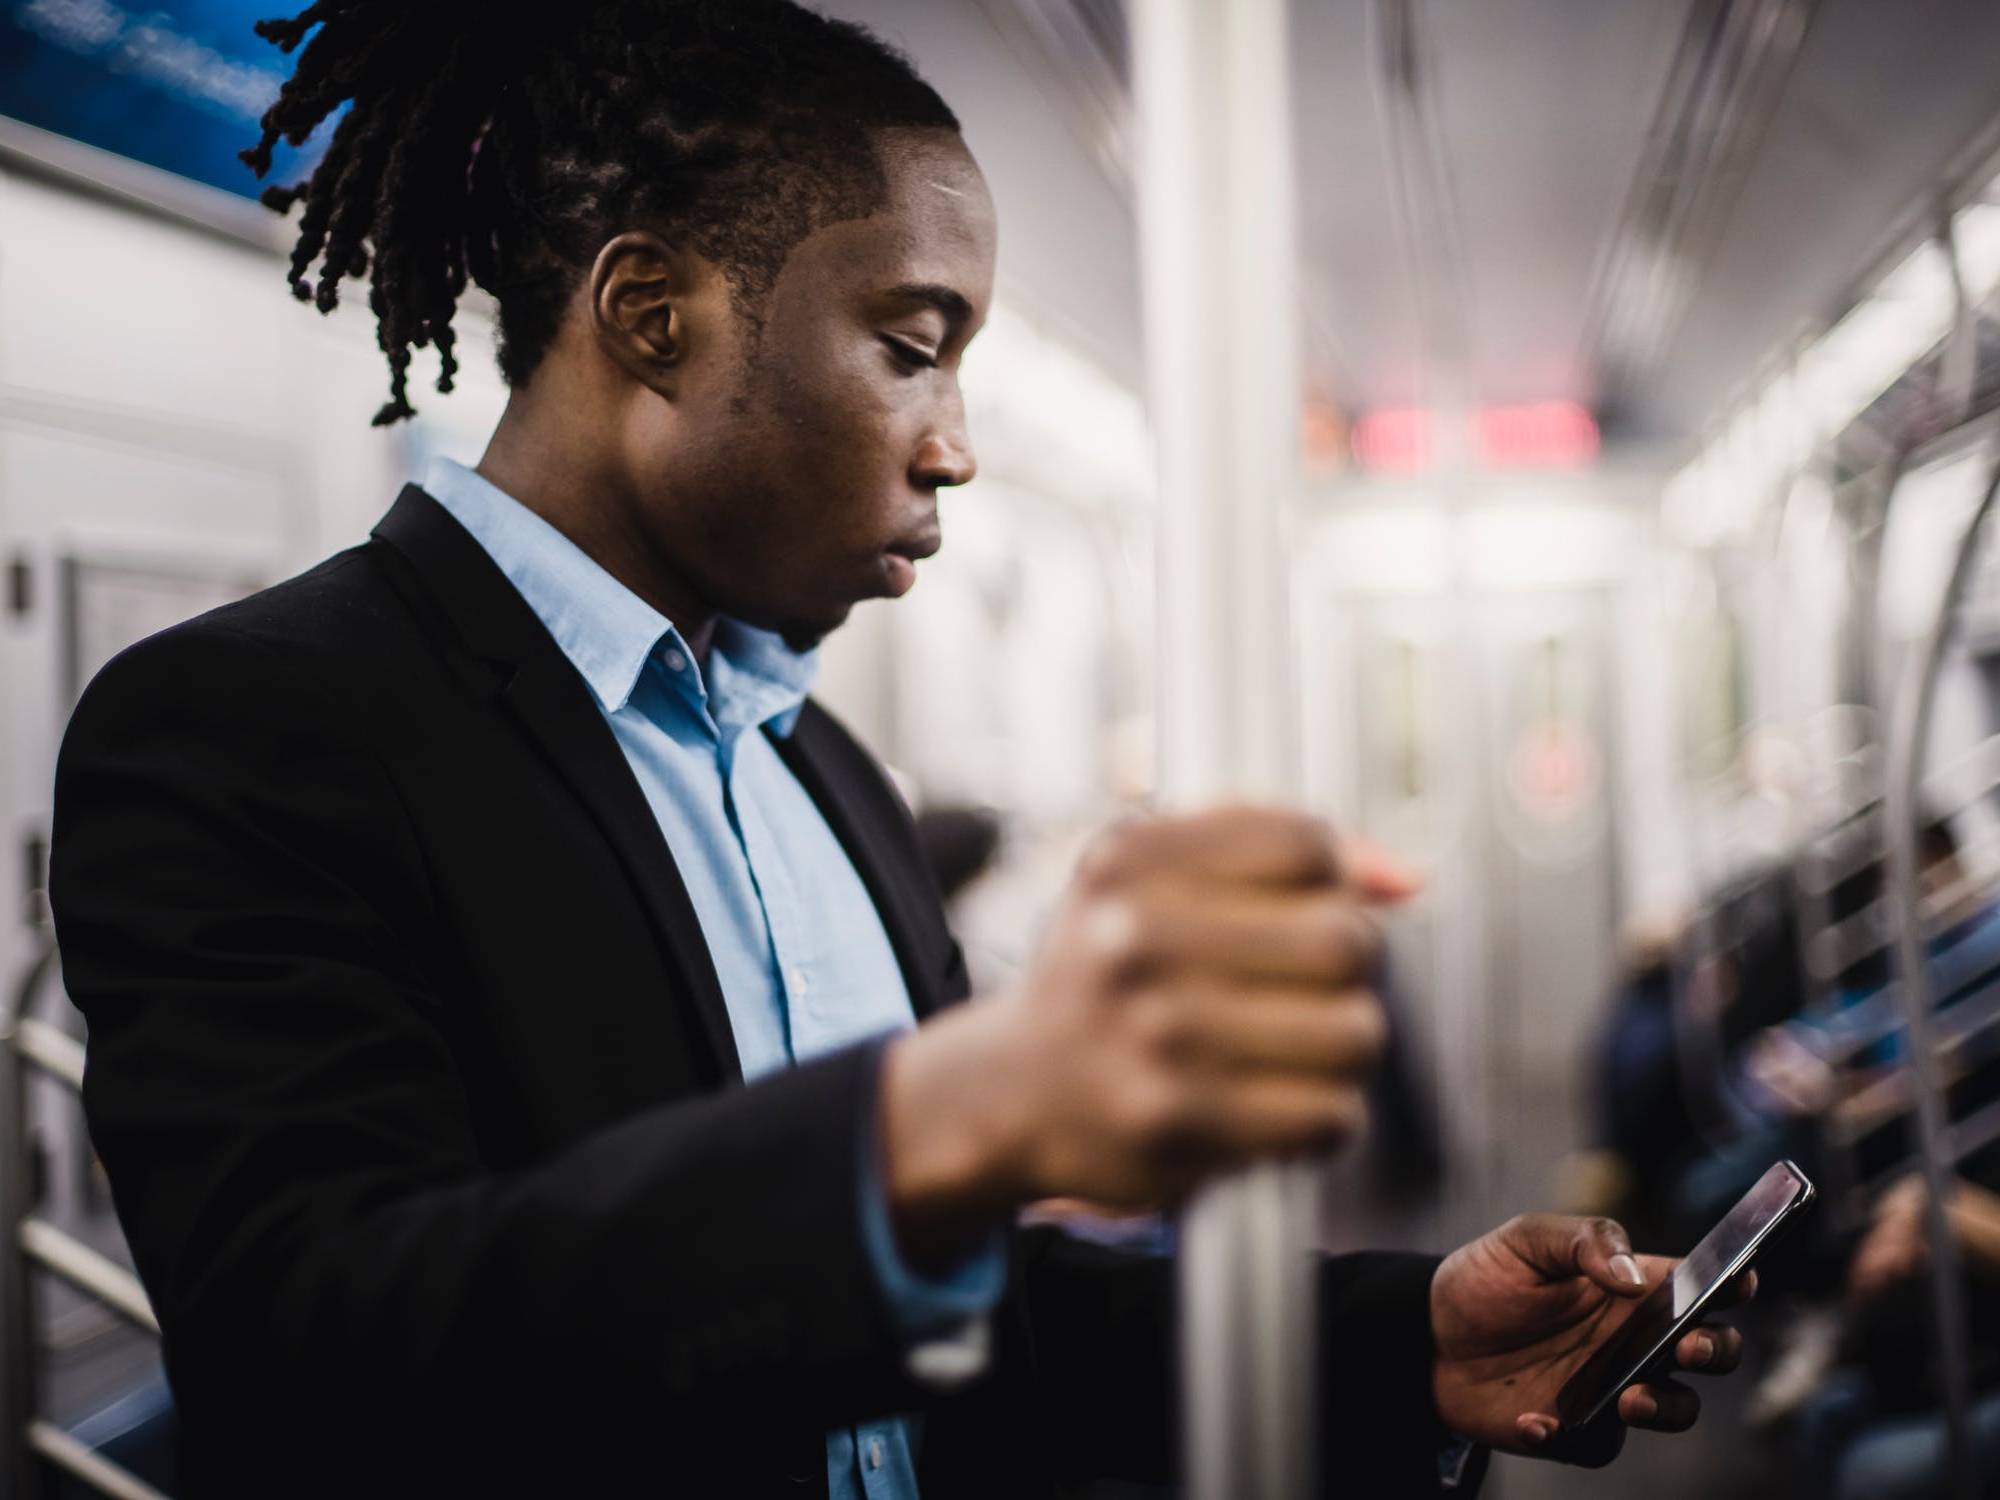 Person on a New York City subway train texting on their phone.